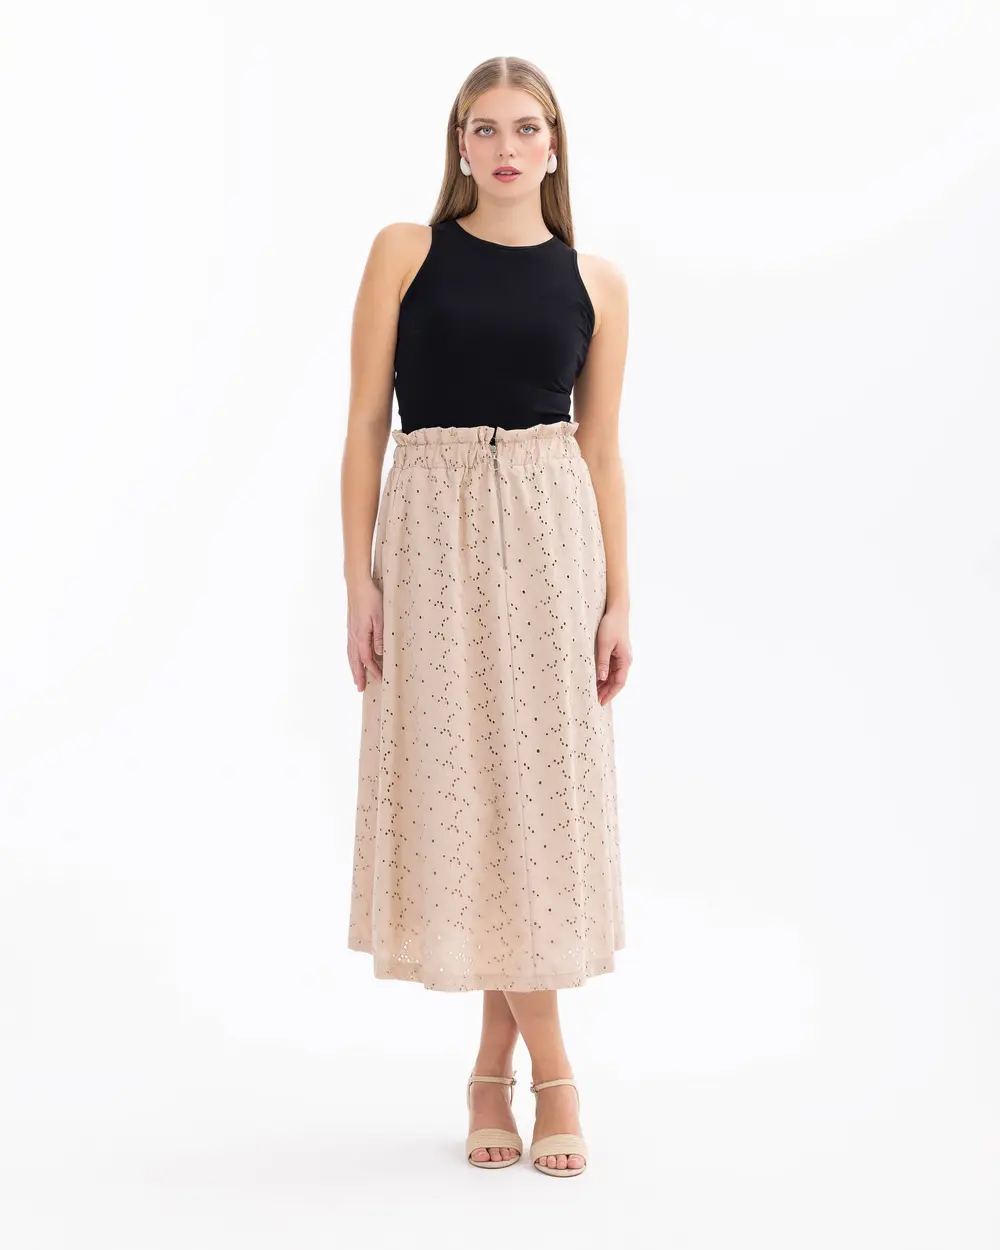 Geometric Patterned Skirt with Elastic Waist Pockets